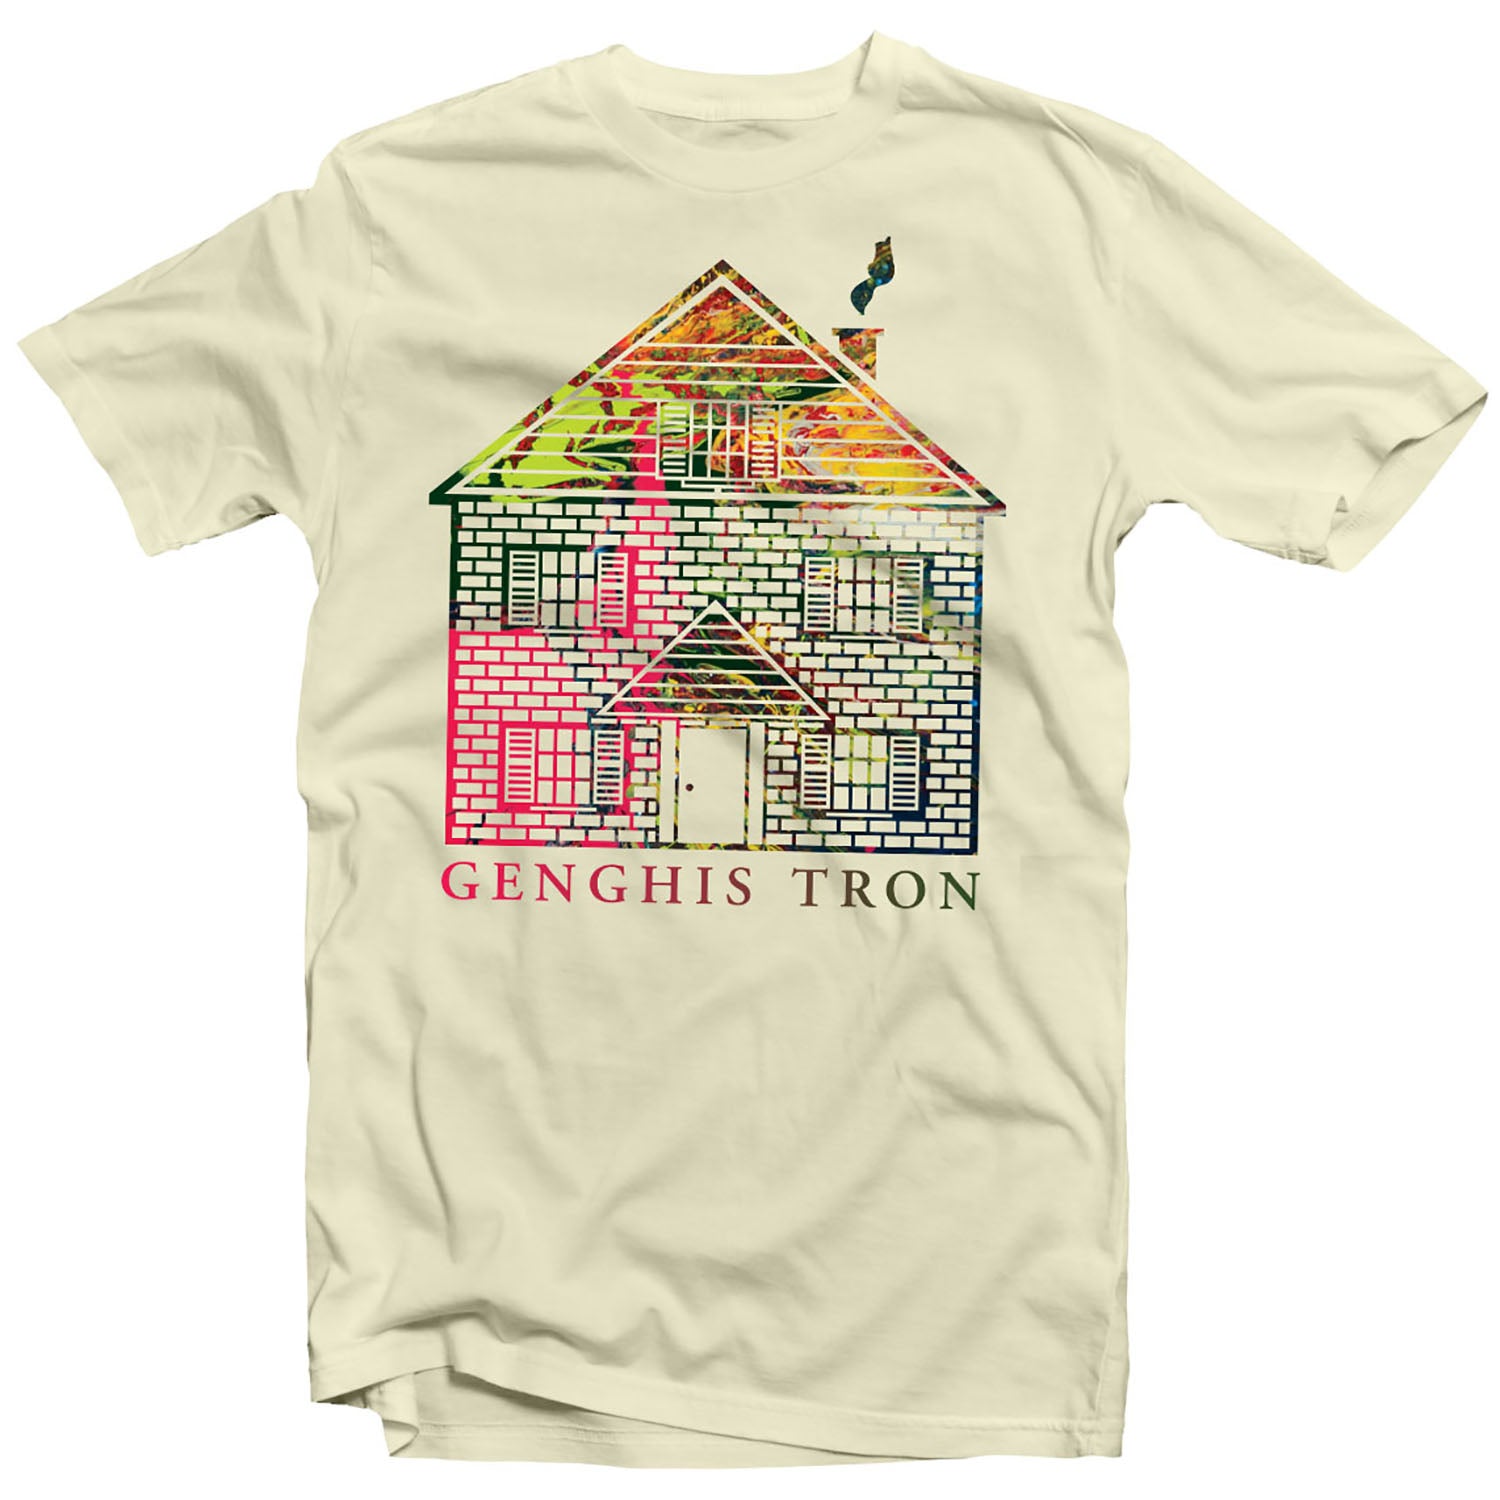 Genghis Tron "Board Up The House" T-Shirt